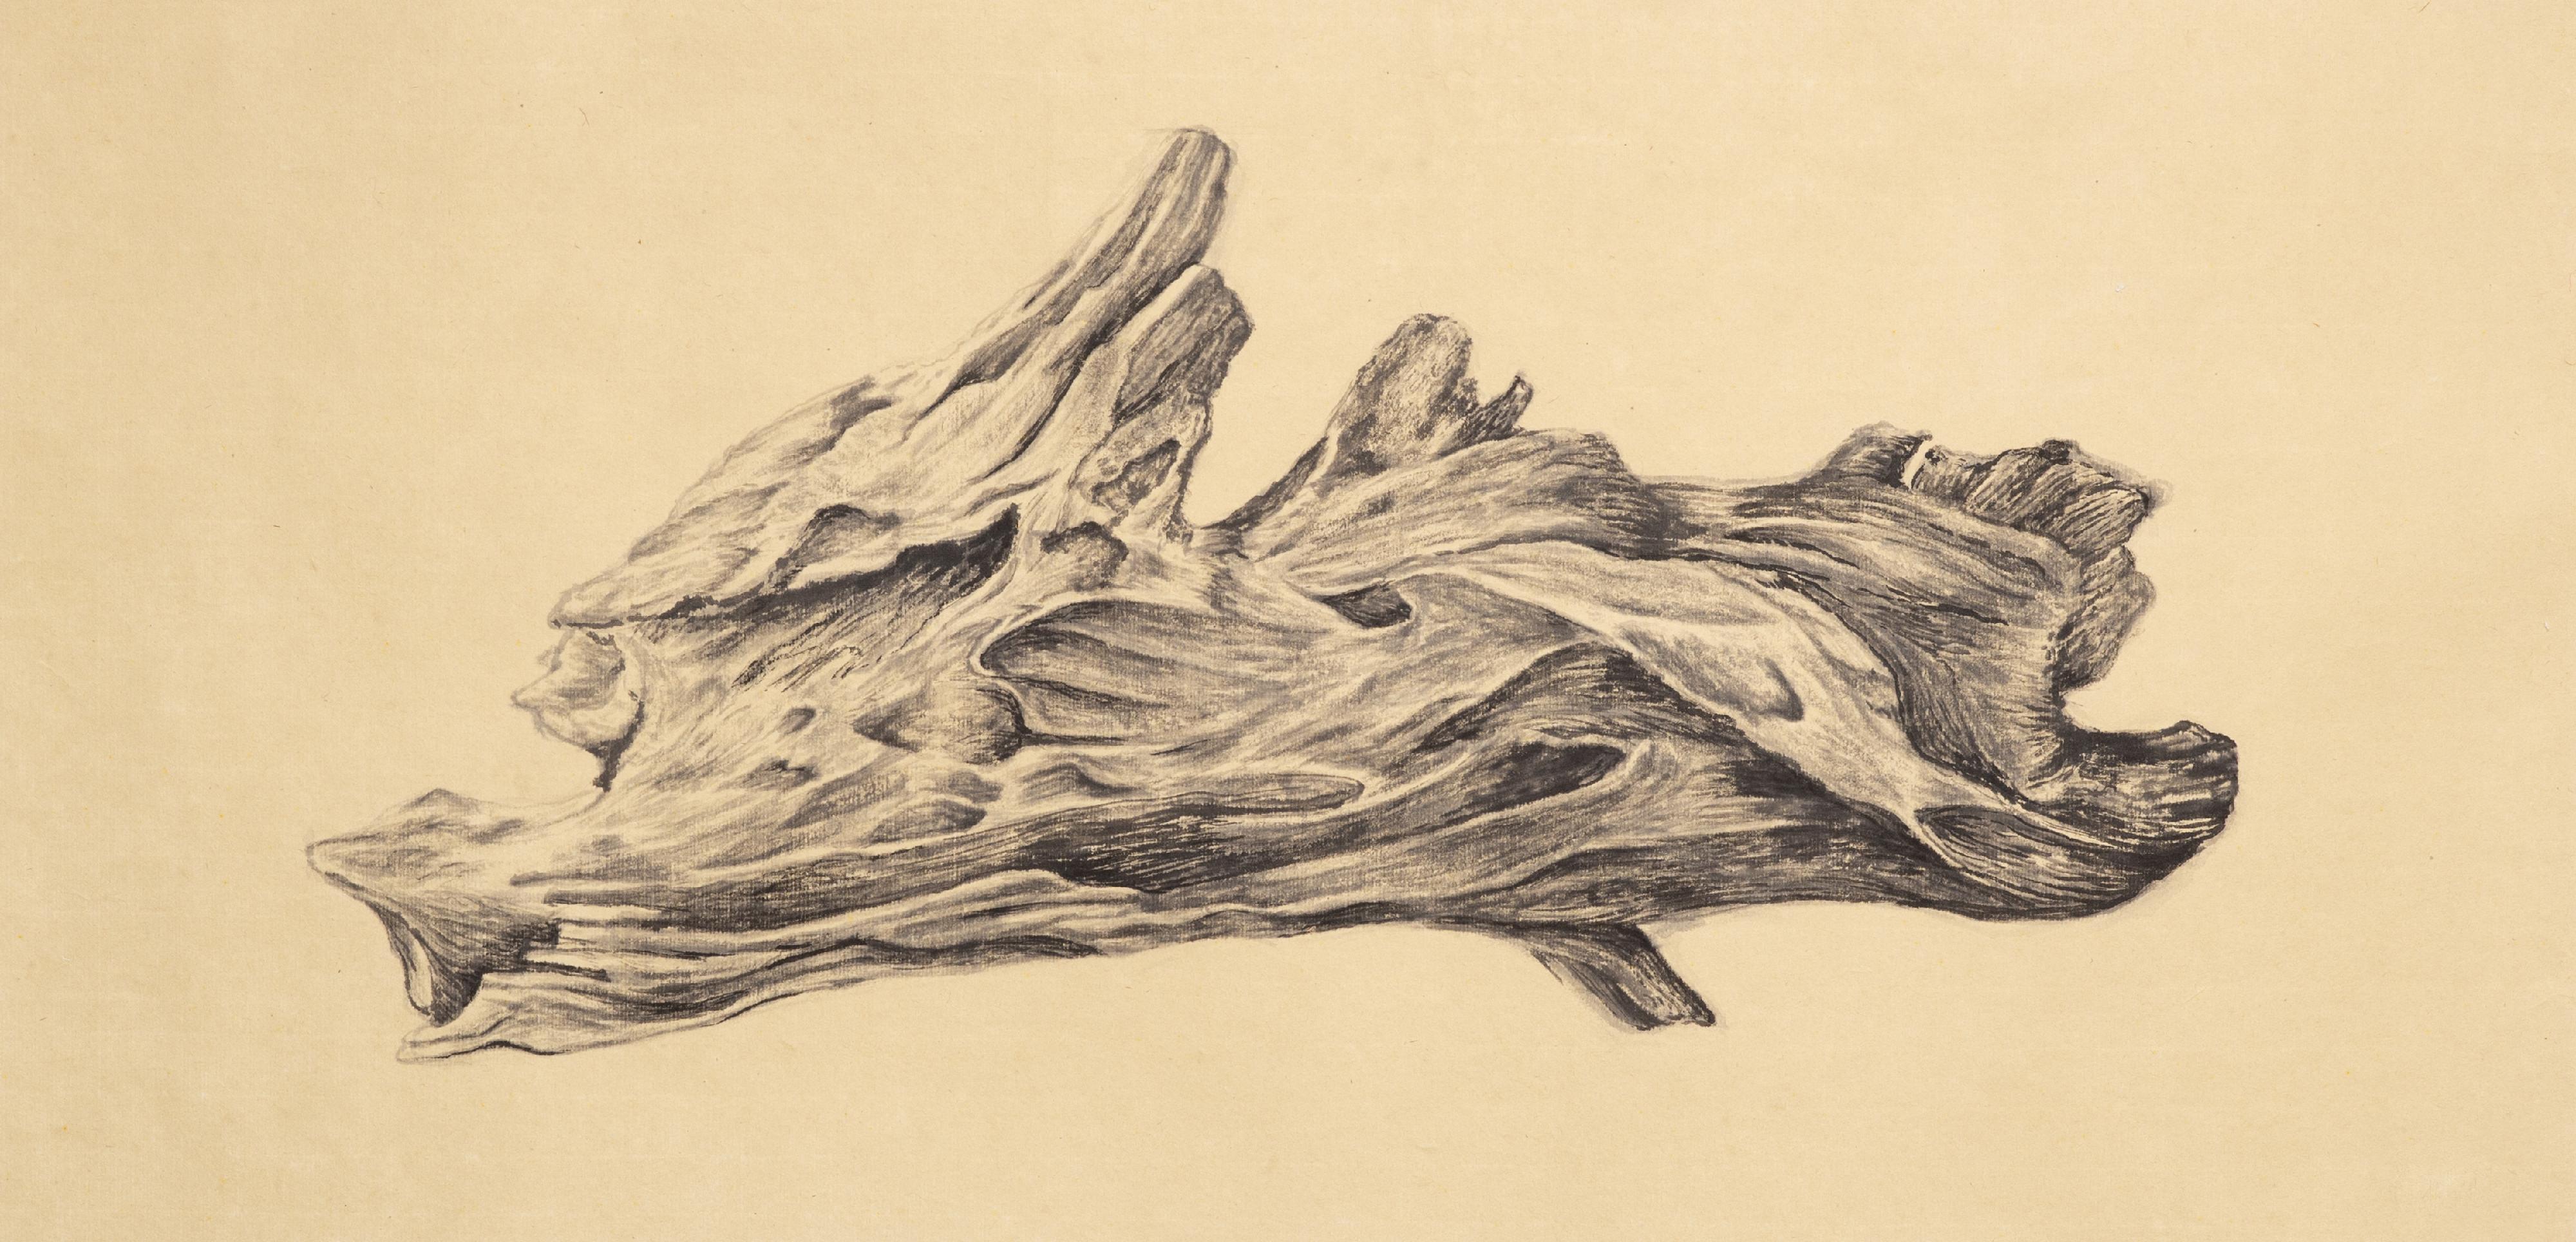 The Hong Kong Visual Arts Centre is holding the "Art Specialist Course 2022-23 Graduation Exhibition" from yesterday (October 26), to showcase creative achievements by 20 graduates. Picture shows Art Specialist Course (Ink Art) graduate Fu Nga-yin's artwork "Wood".
